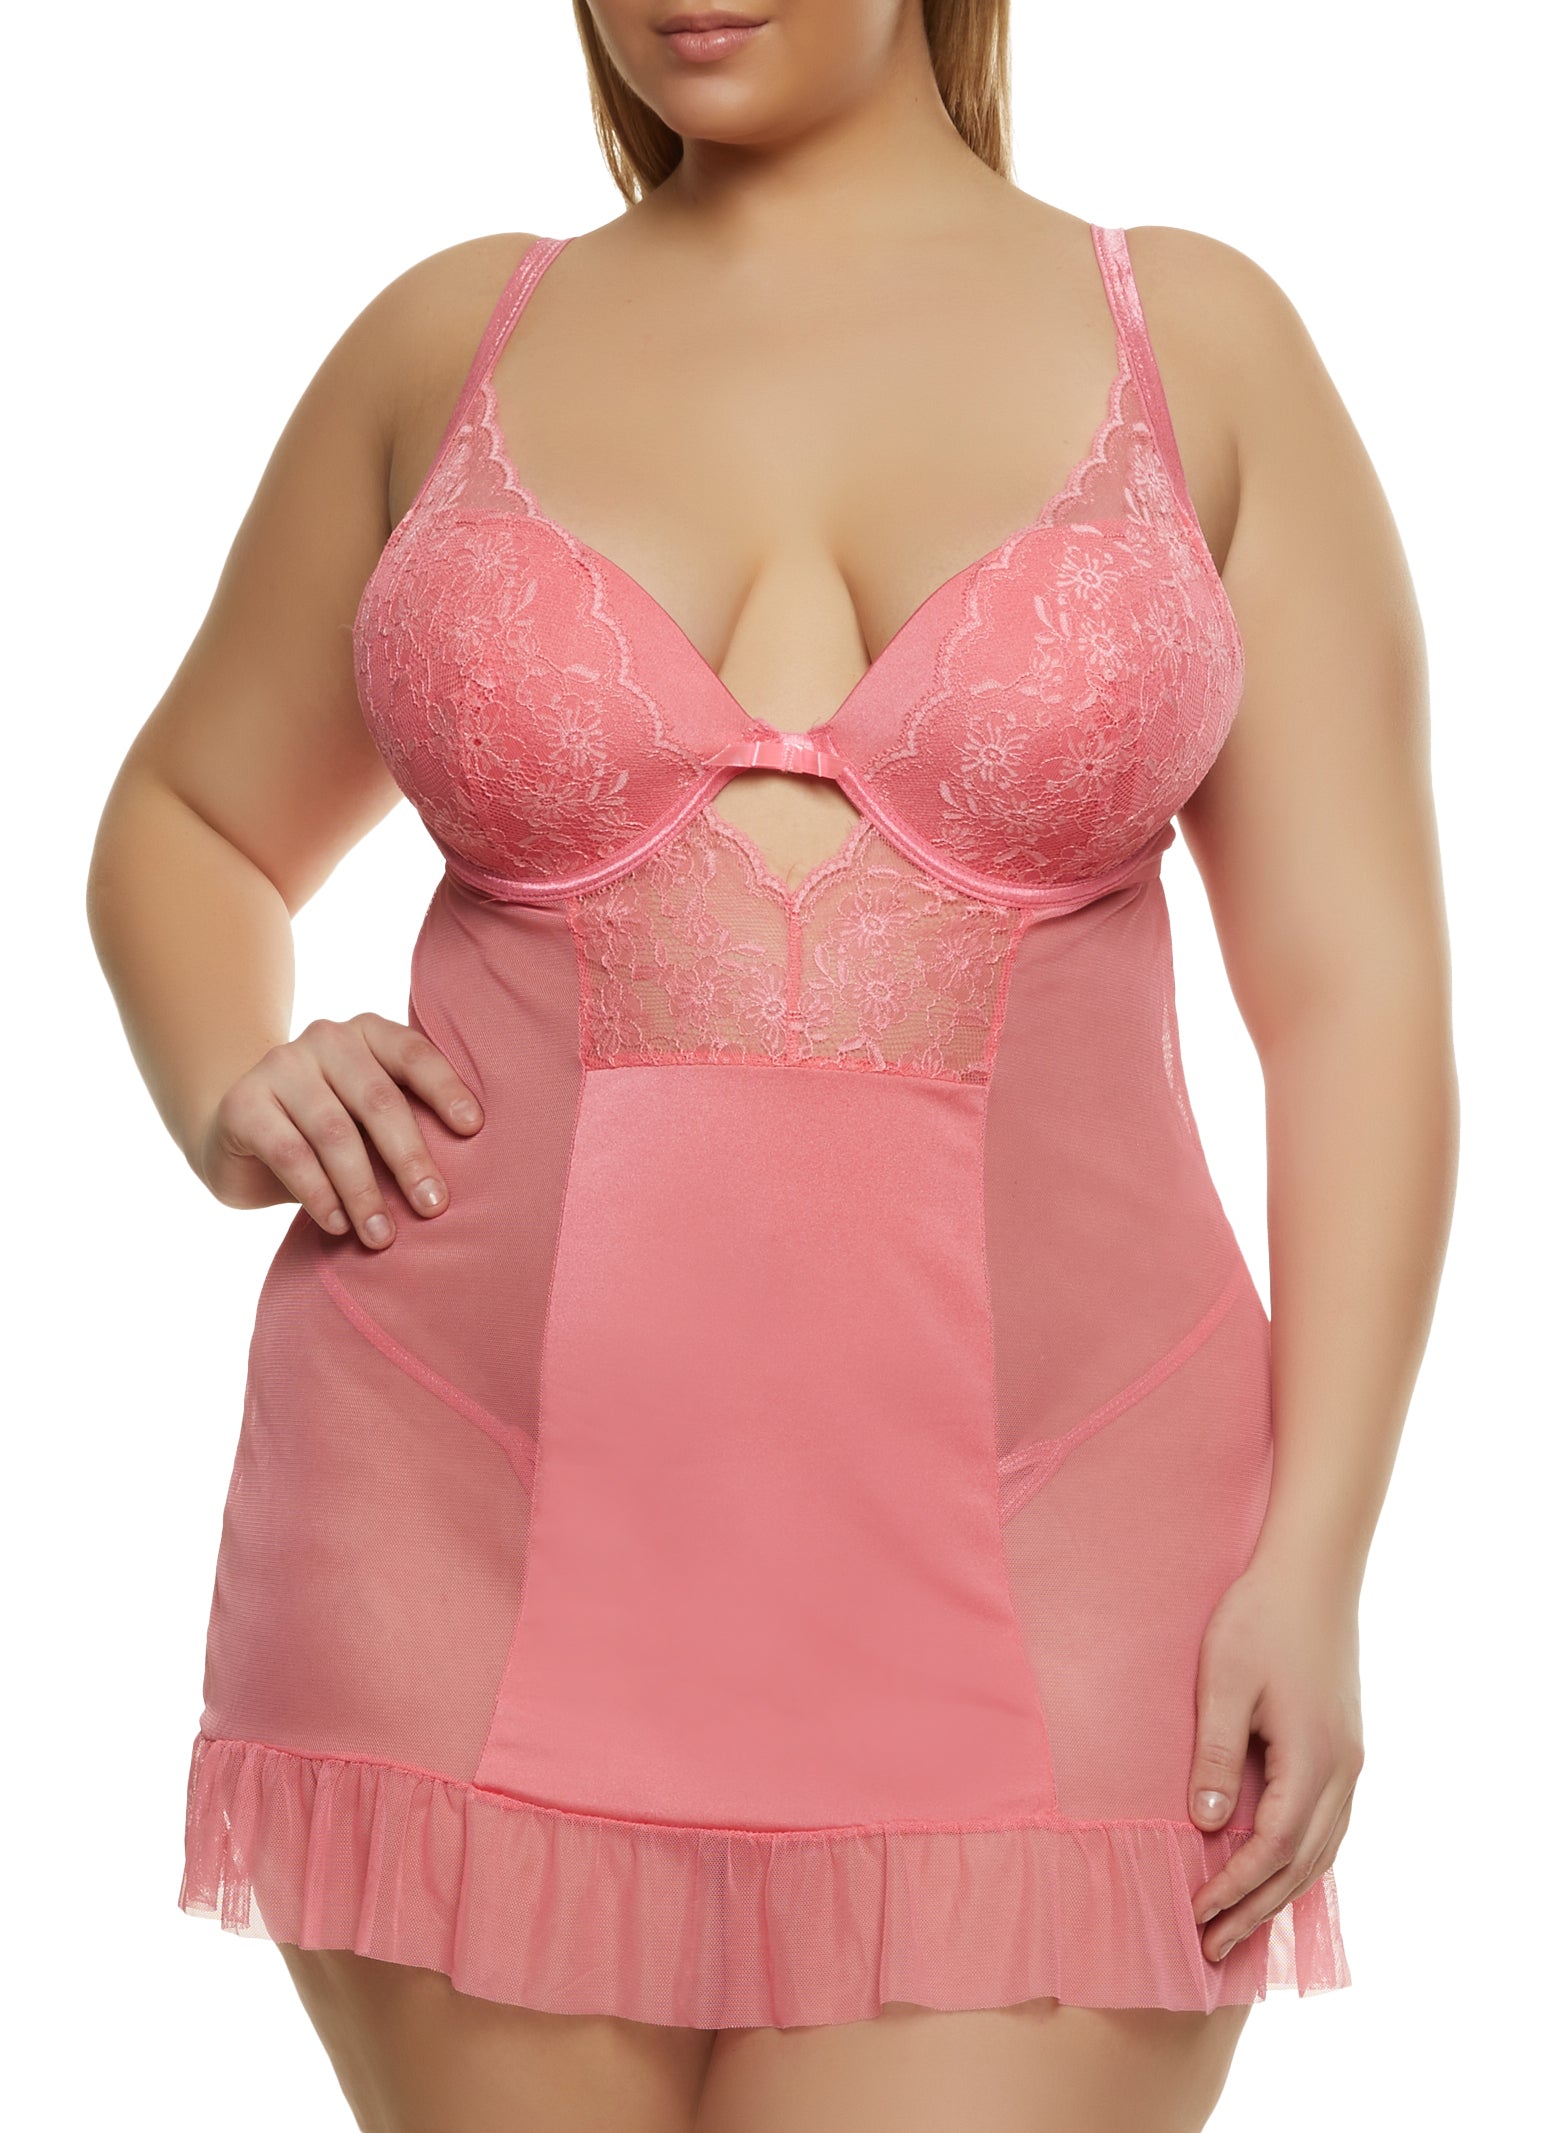 Plus Size Sheer Lace Babydoll and G String - Pink